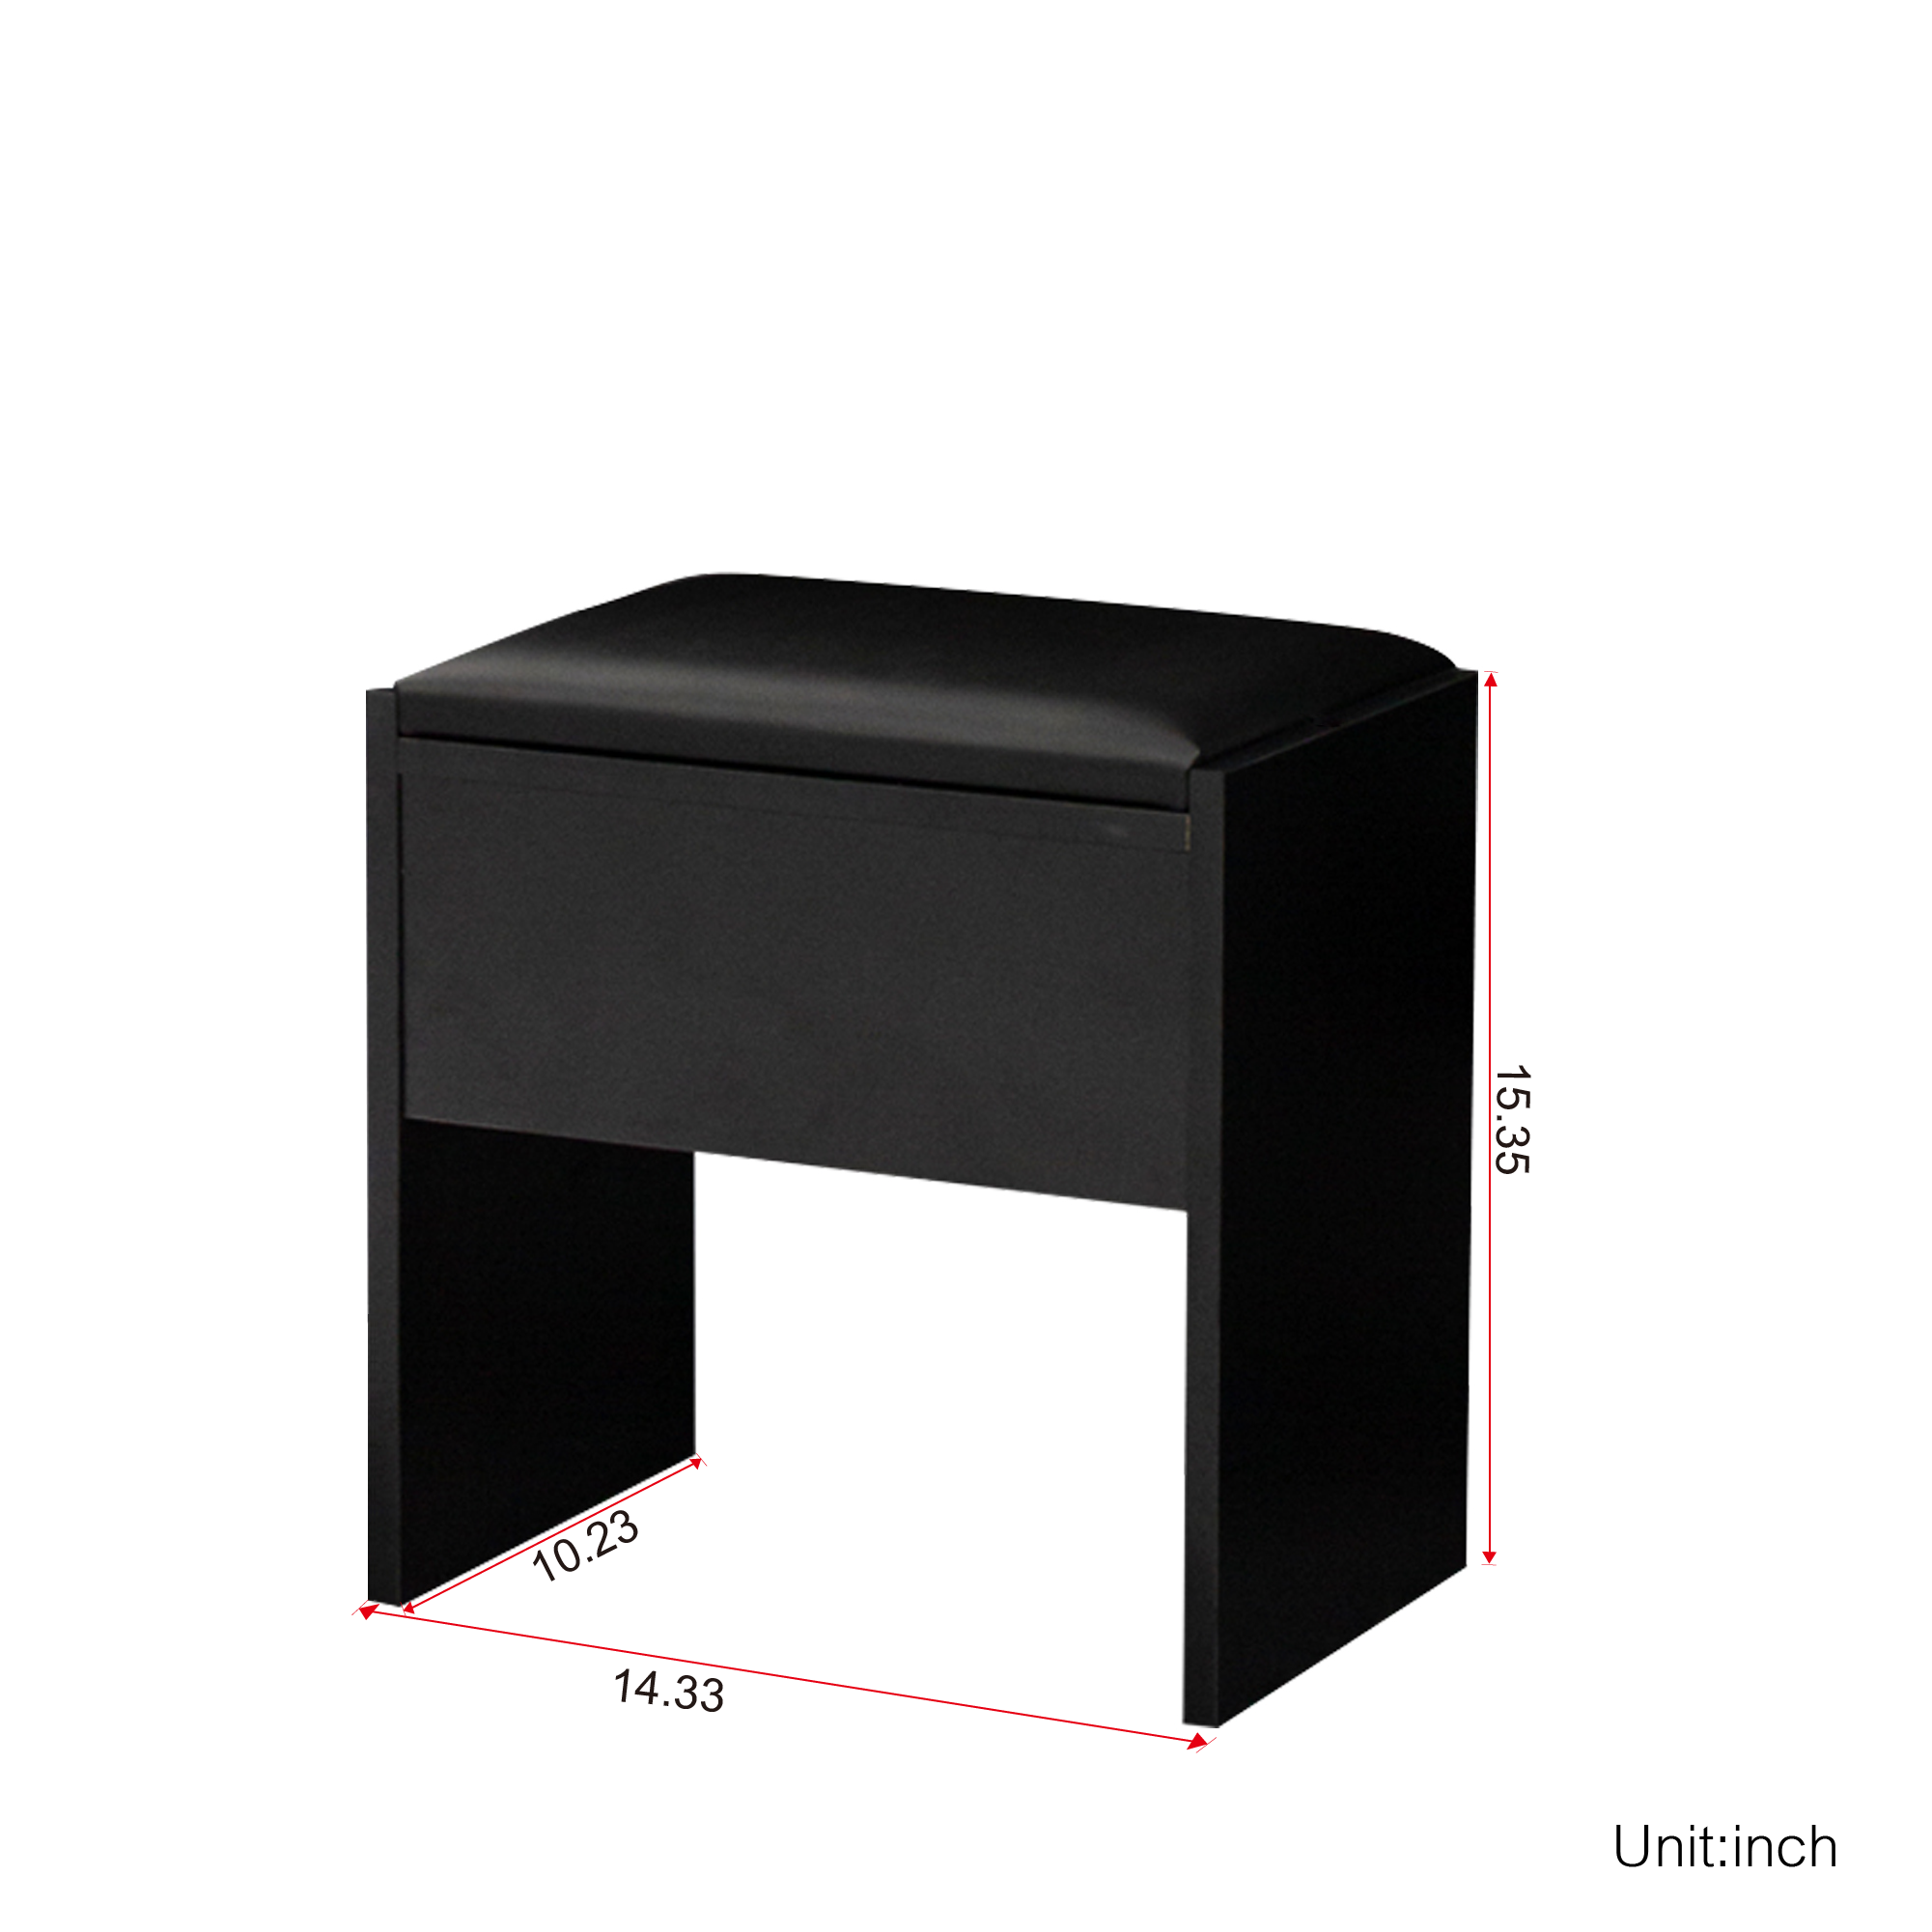 Makeup Dressing Table with Light and Stool (Black)